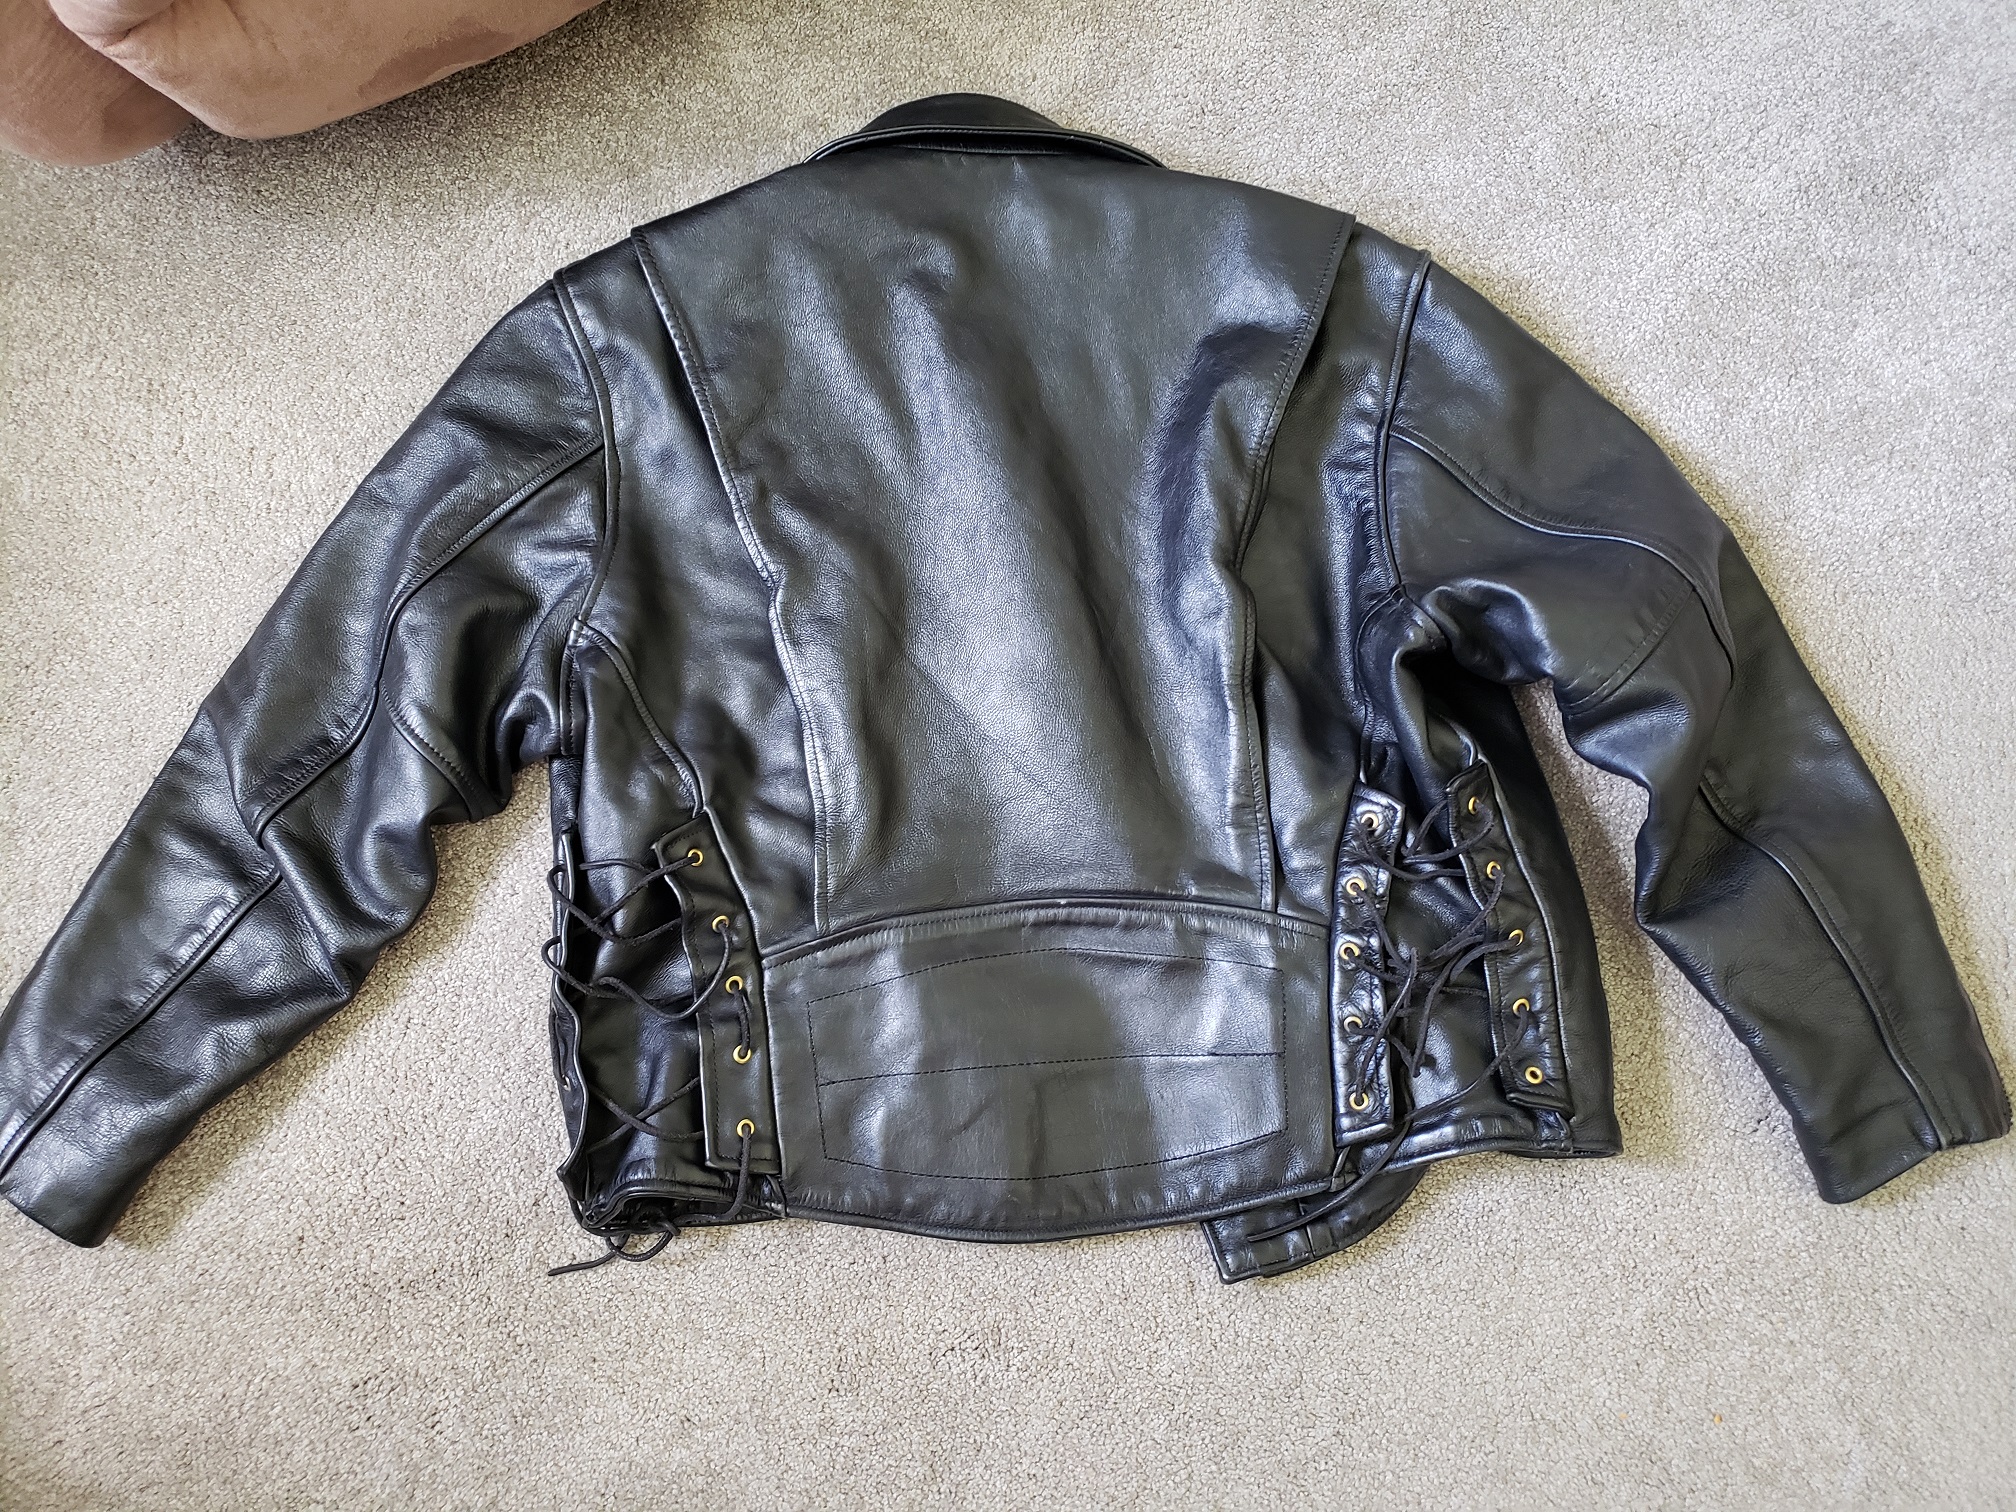 Actual weight of a leather jacket | The Fedora Lounge